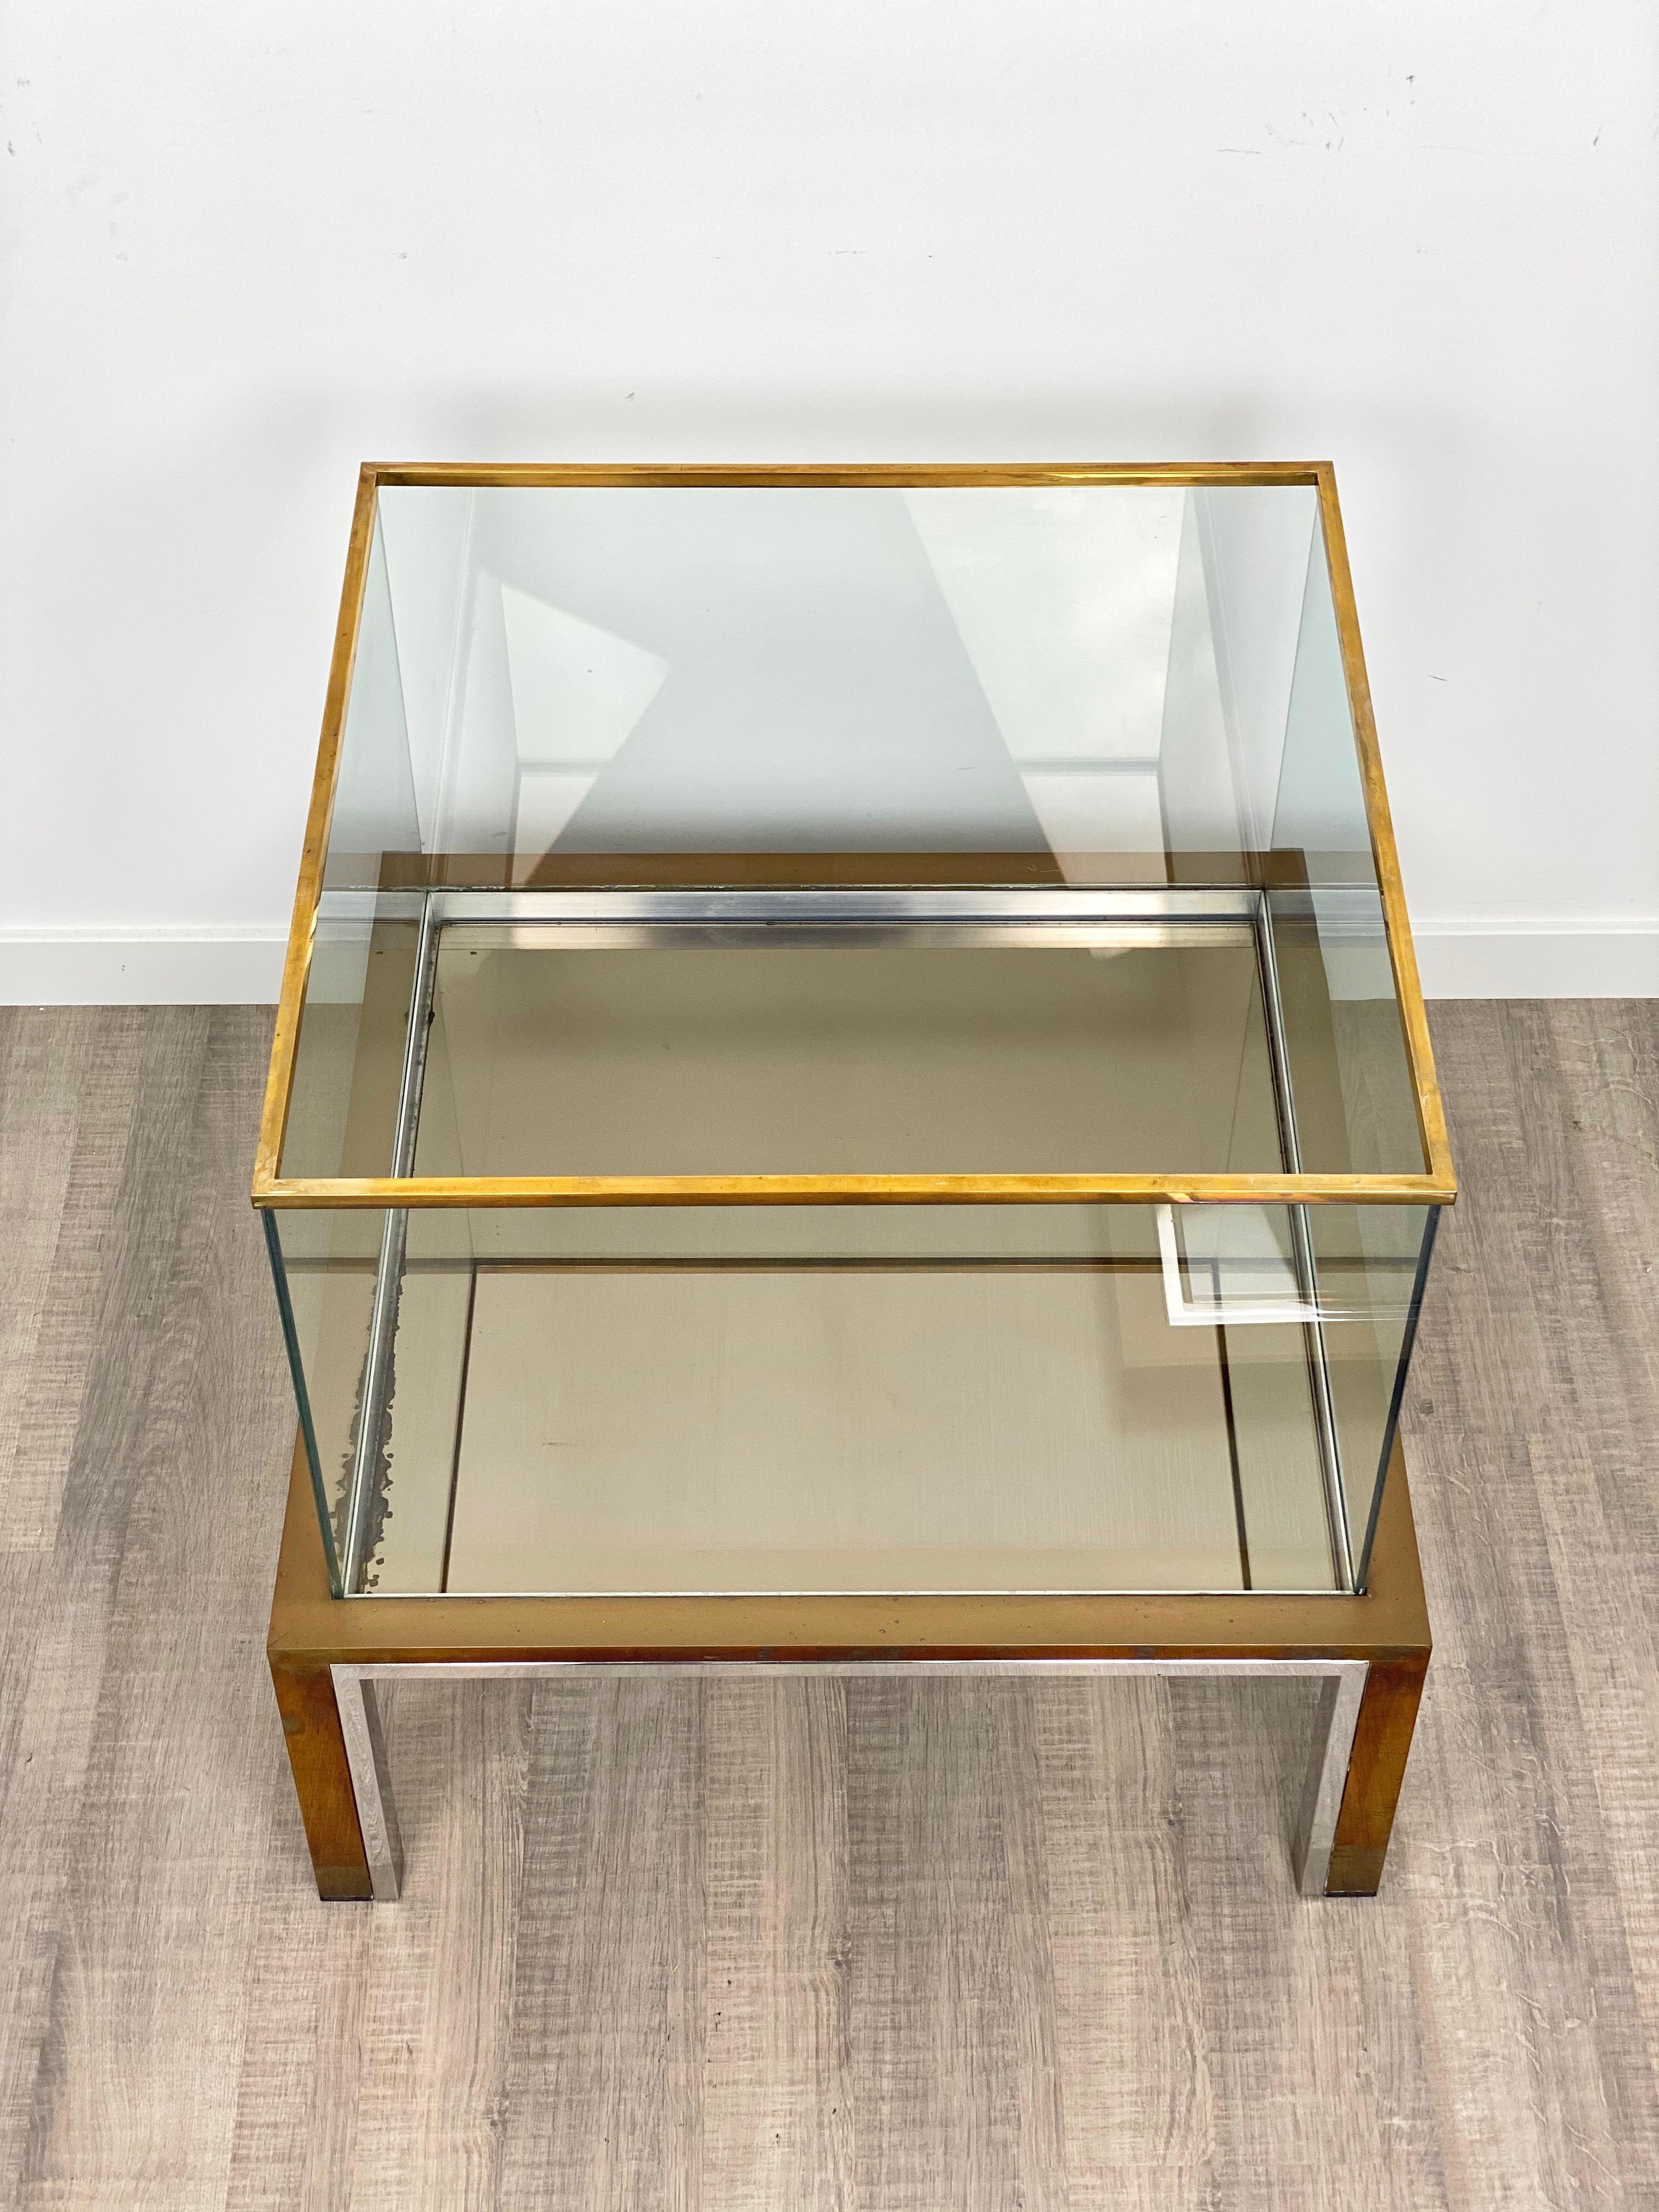 Romeo Rega Coffee Side Bar Cabinet Table in Chrome Brass and Glass, Italy, 1970s For Sale 5